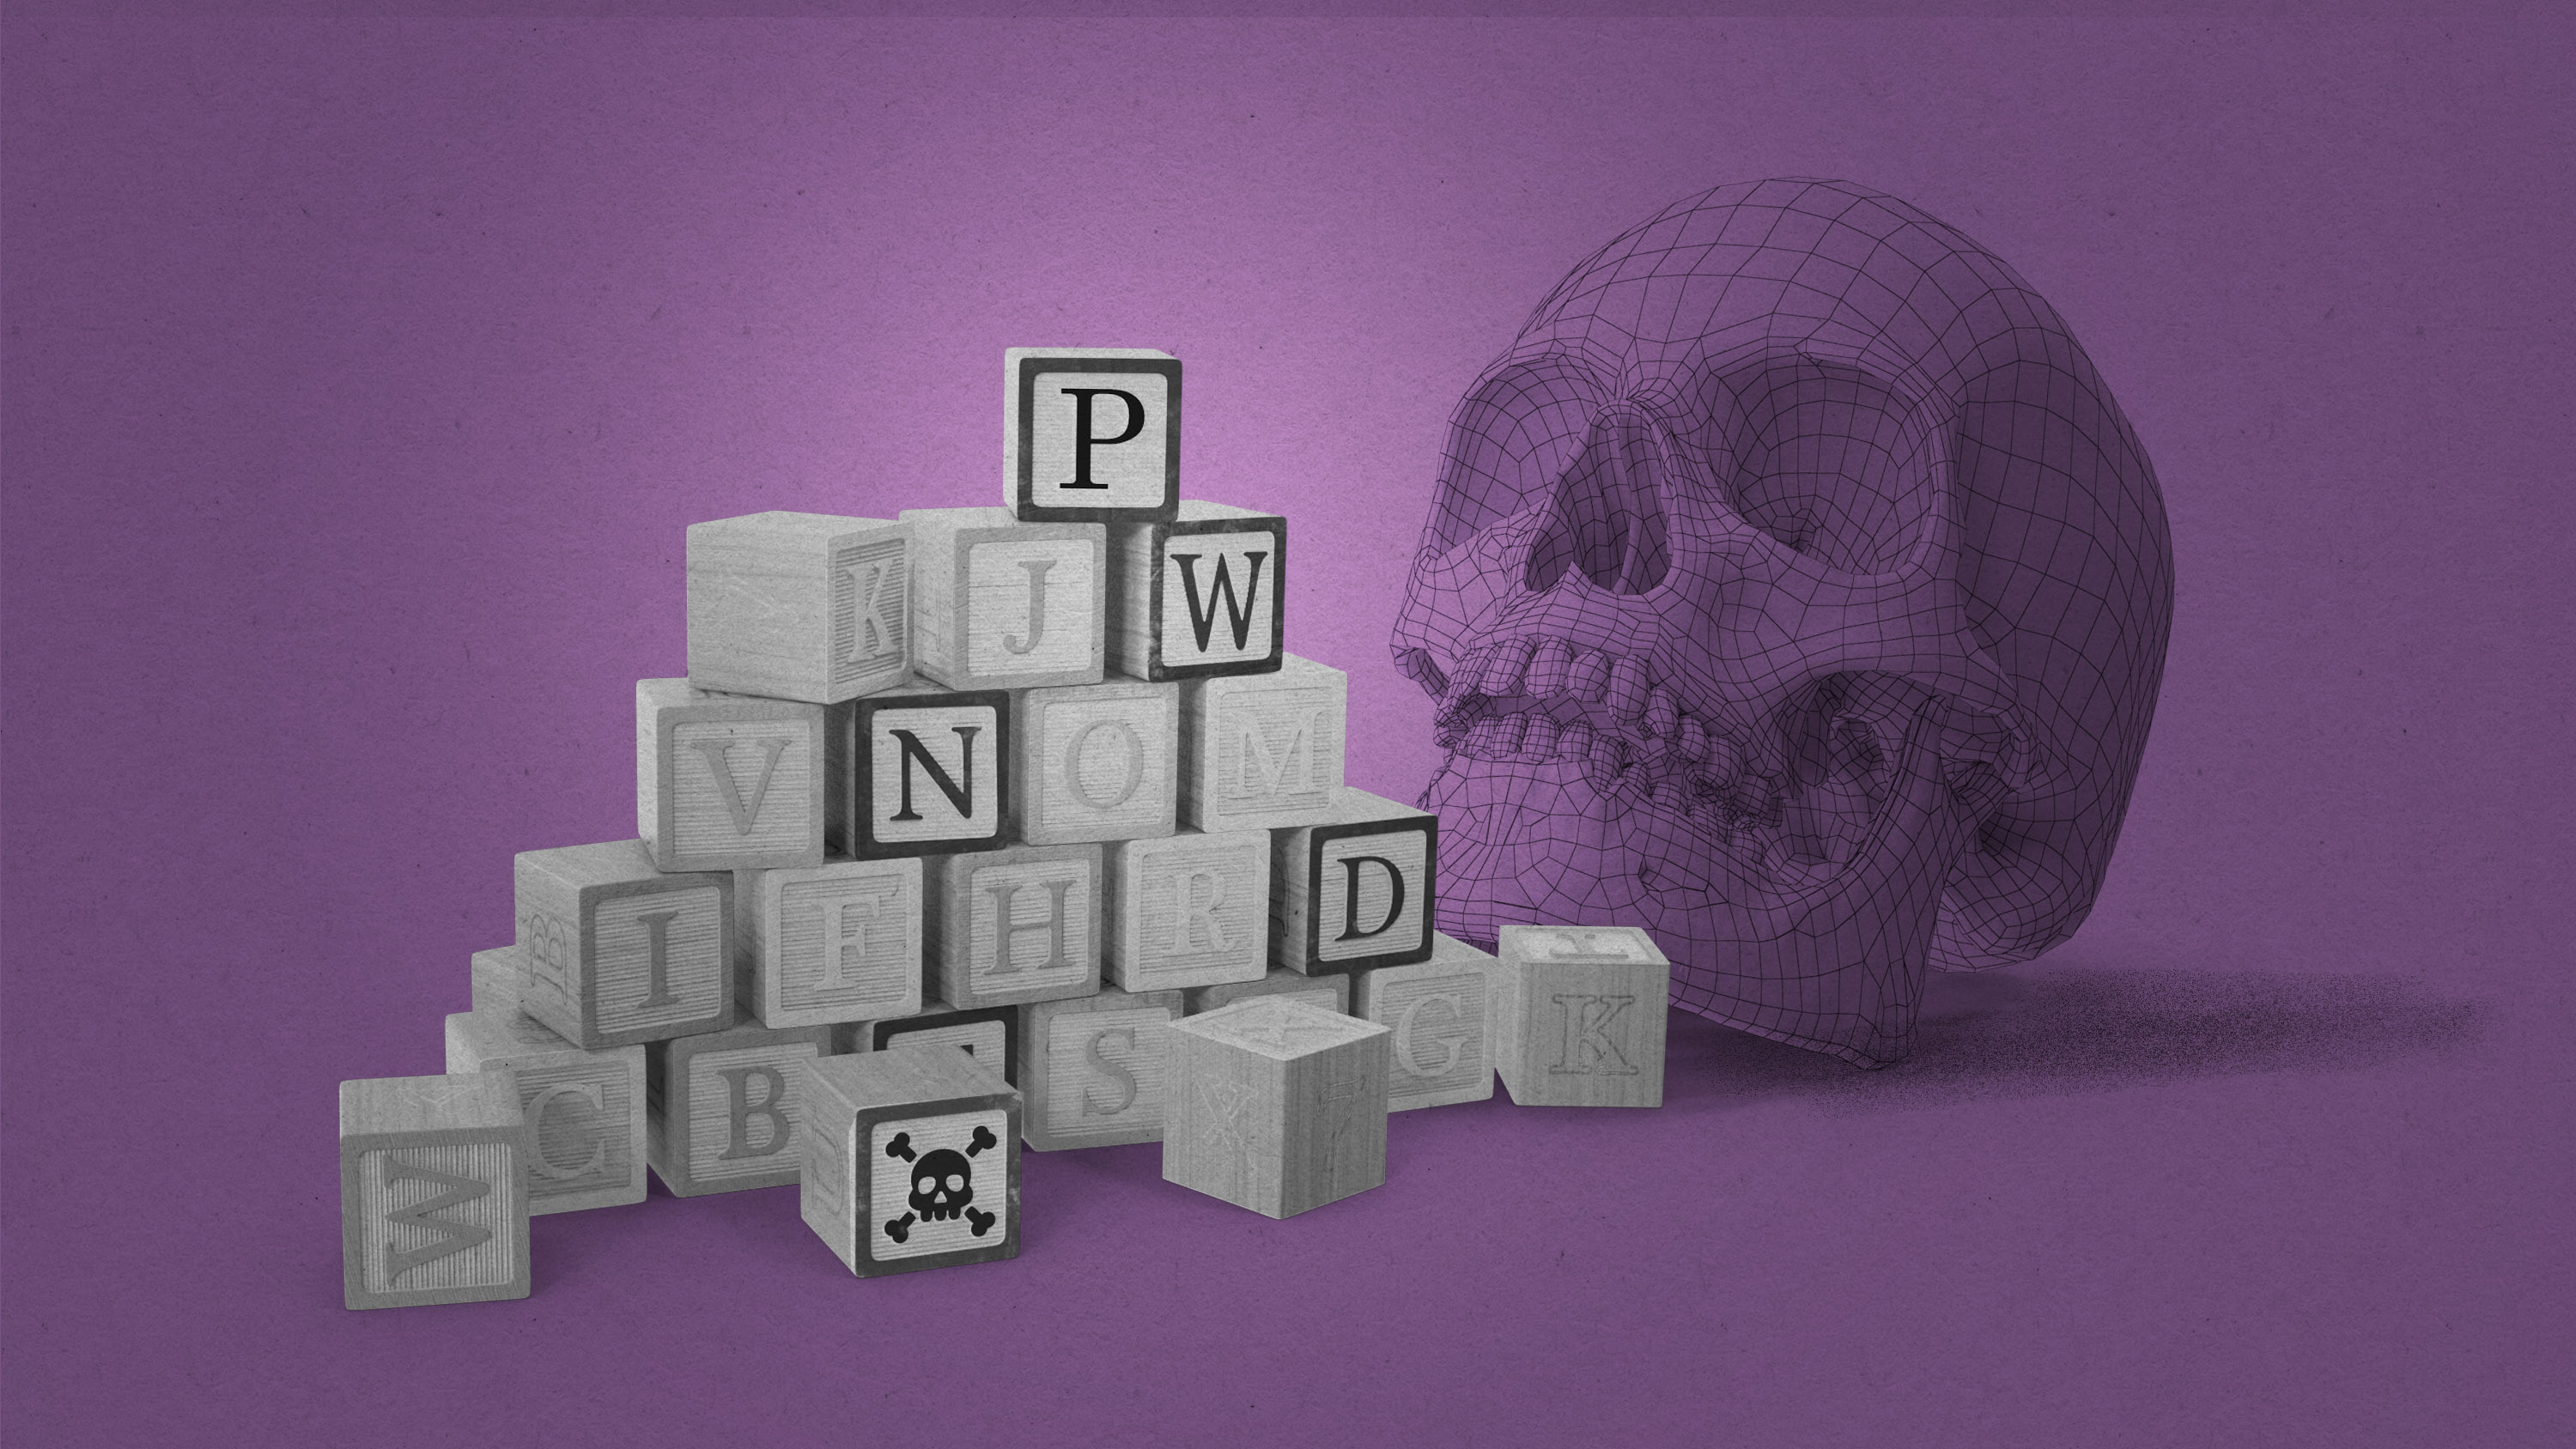 toy letter blocks with message P-W-N-D and the skull with crossbones symbol